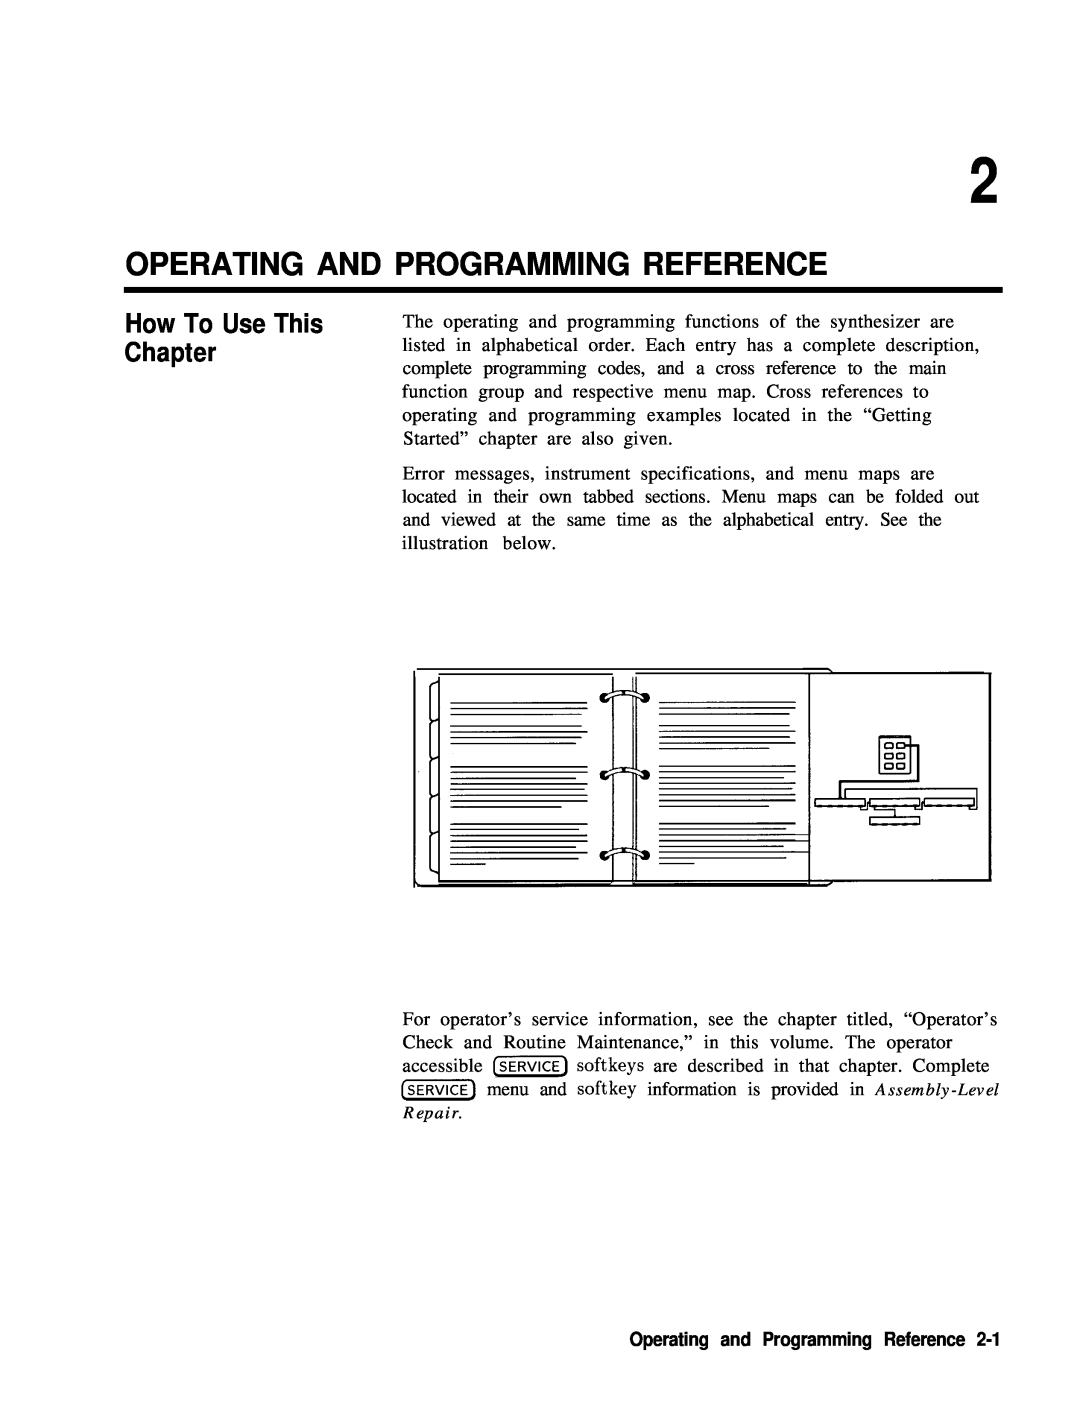 HP 24A, 83620A, 22A manual Operating And Programming Reference, How To Use This Chapter, Operating and Programming Reference 